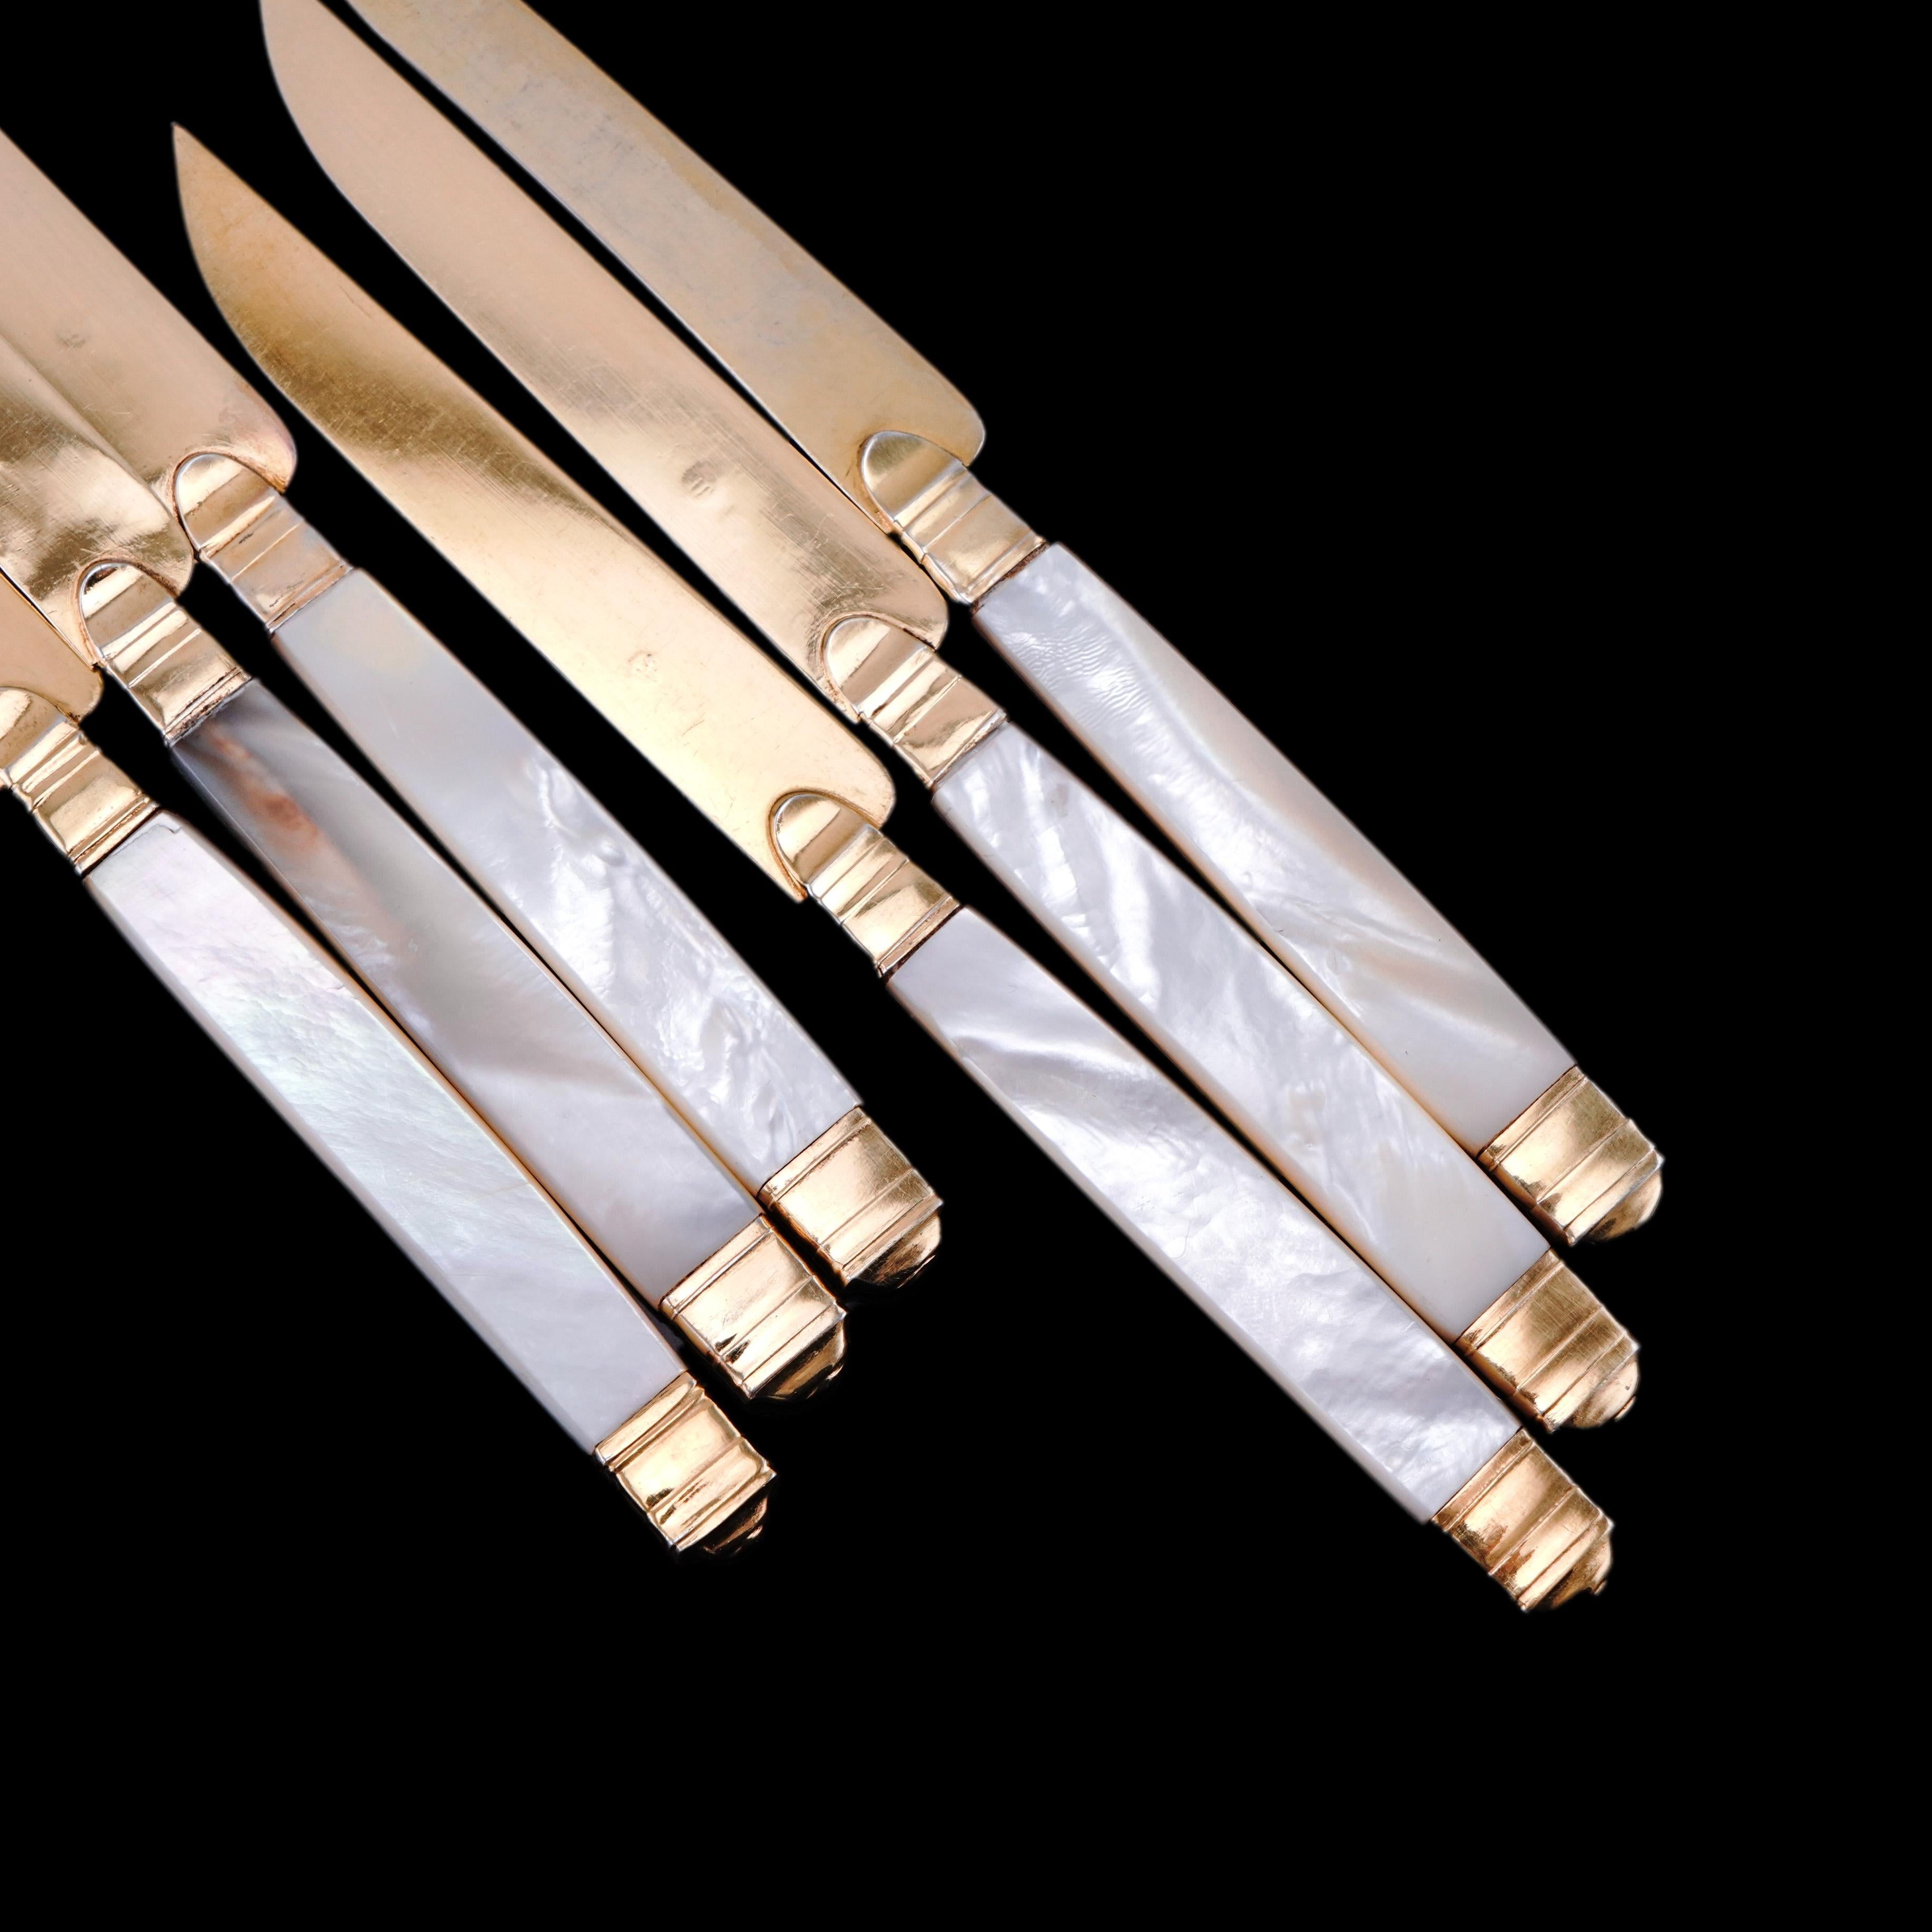 Antique Solid Silver Gilt Mother of Pearl Knives Set of 6 - 19th C. Dutch For Sale 6